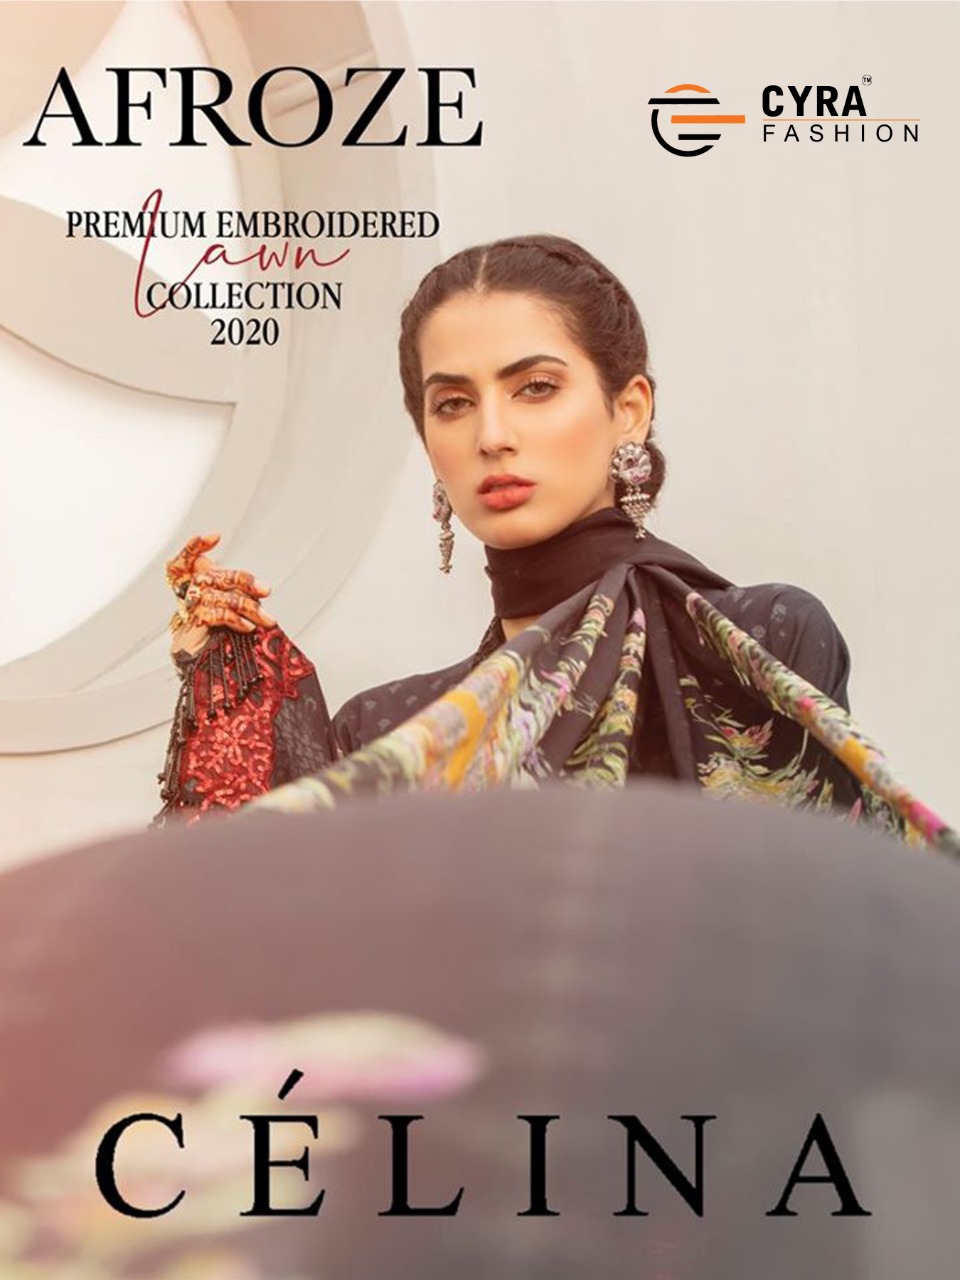 Cyra Fashion Afroze Premium Embroidered Lawn Collection 2020...